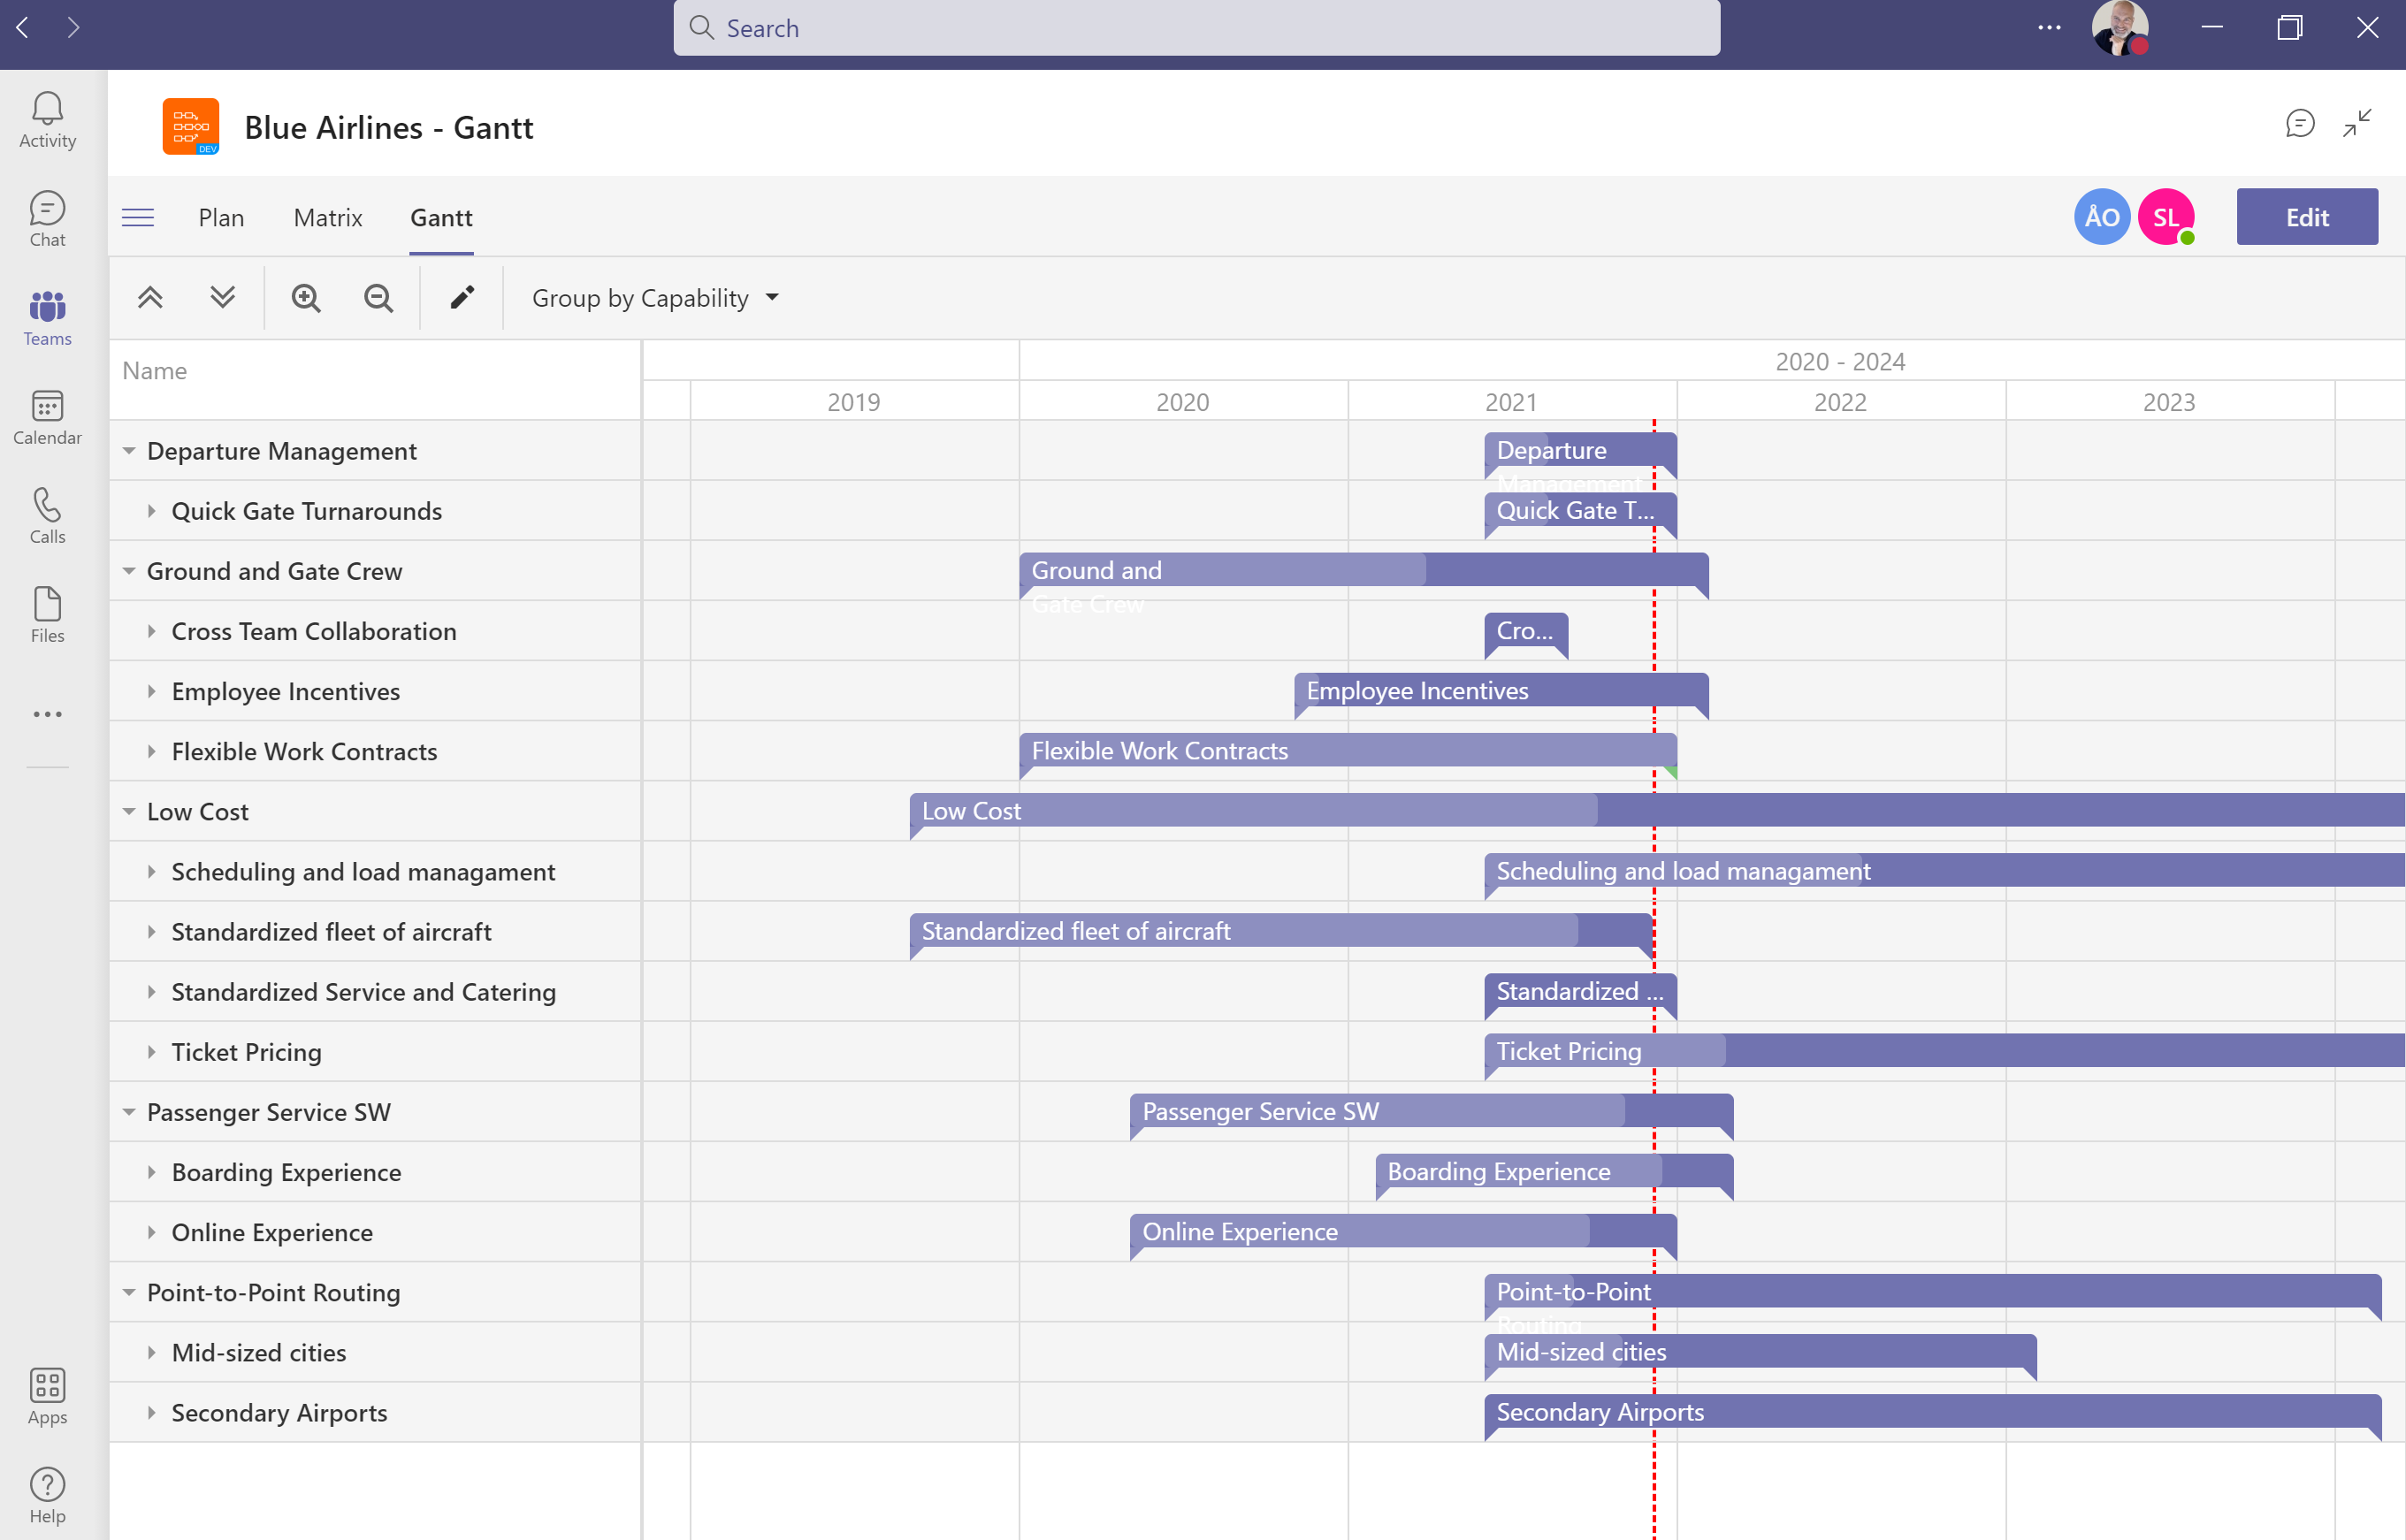 VisPlan update: New Gantt view and completed Actions